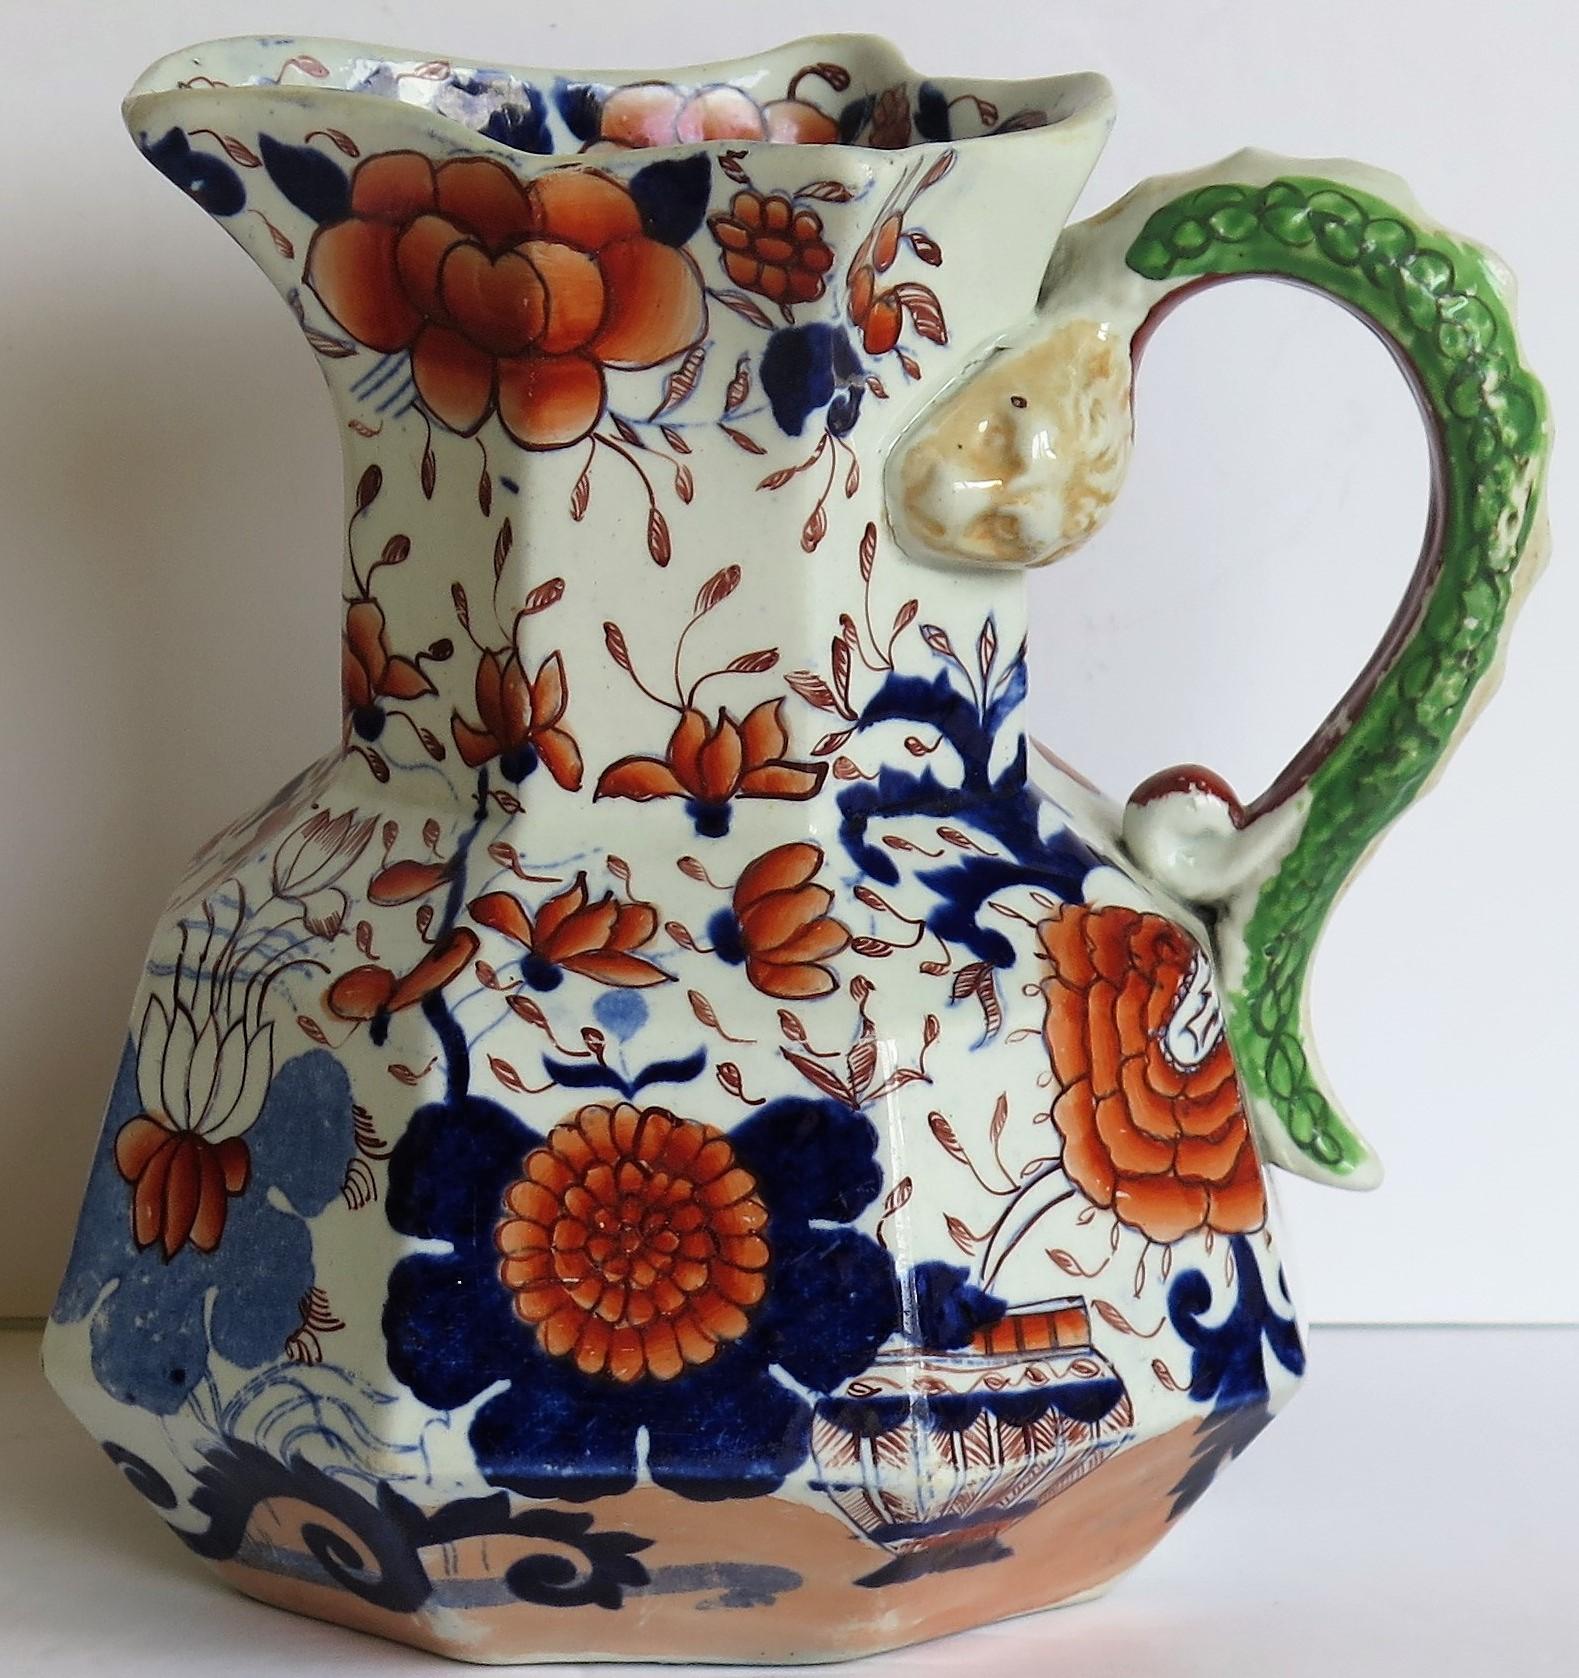 This is a good, large, early Mason's Ironstone Hydra jug or pitcher in the basket Japan pattern, made in the English, late Georgian period, circa 1815-1820.

The jug has an octagonal shape with a notched snake handle and is decorated in the